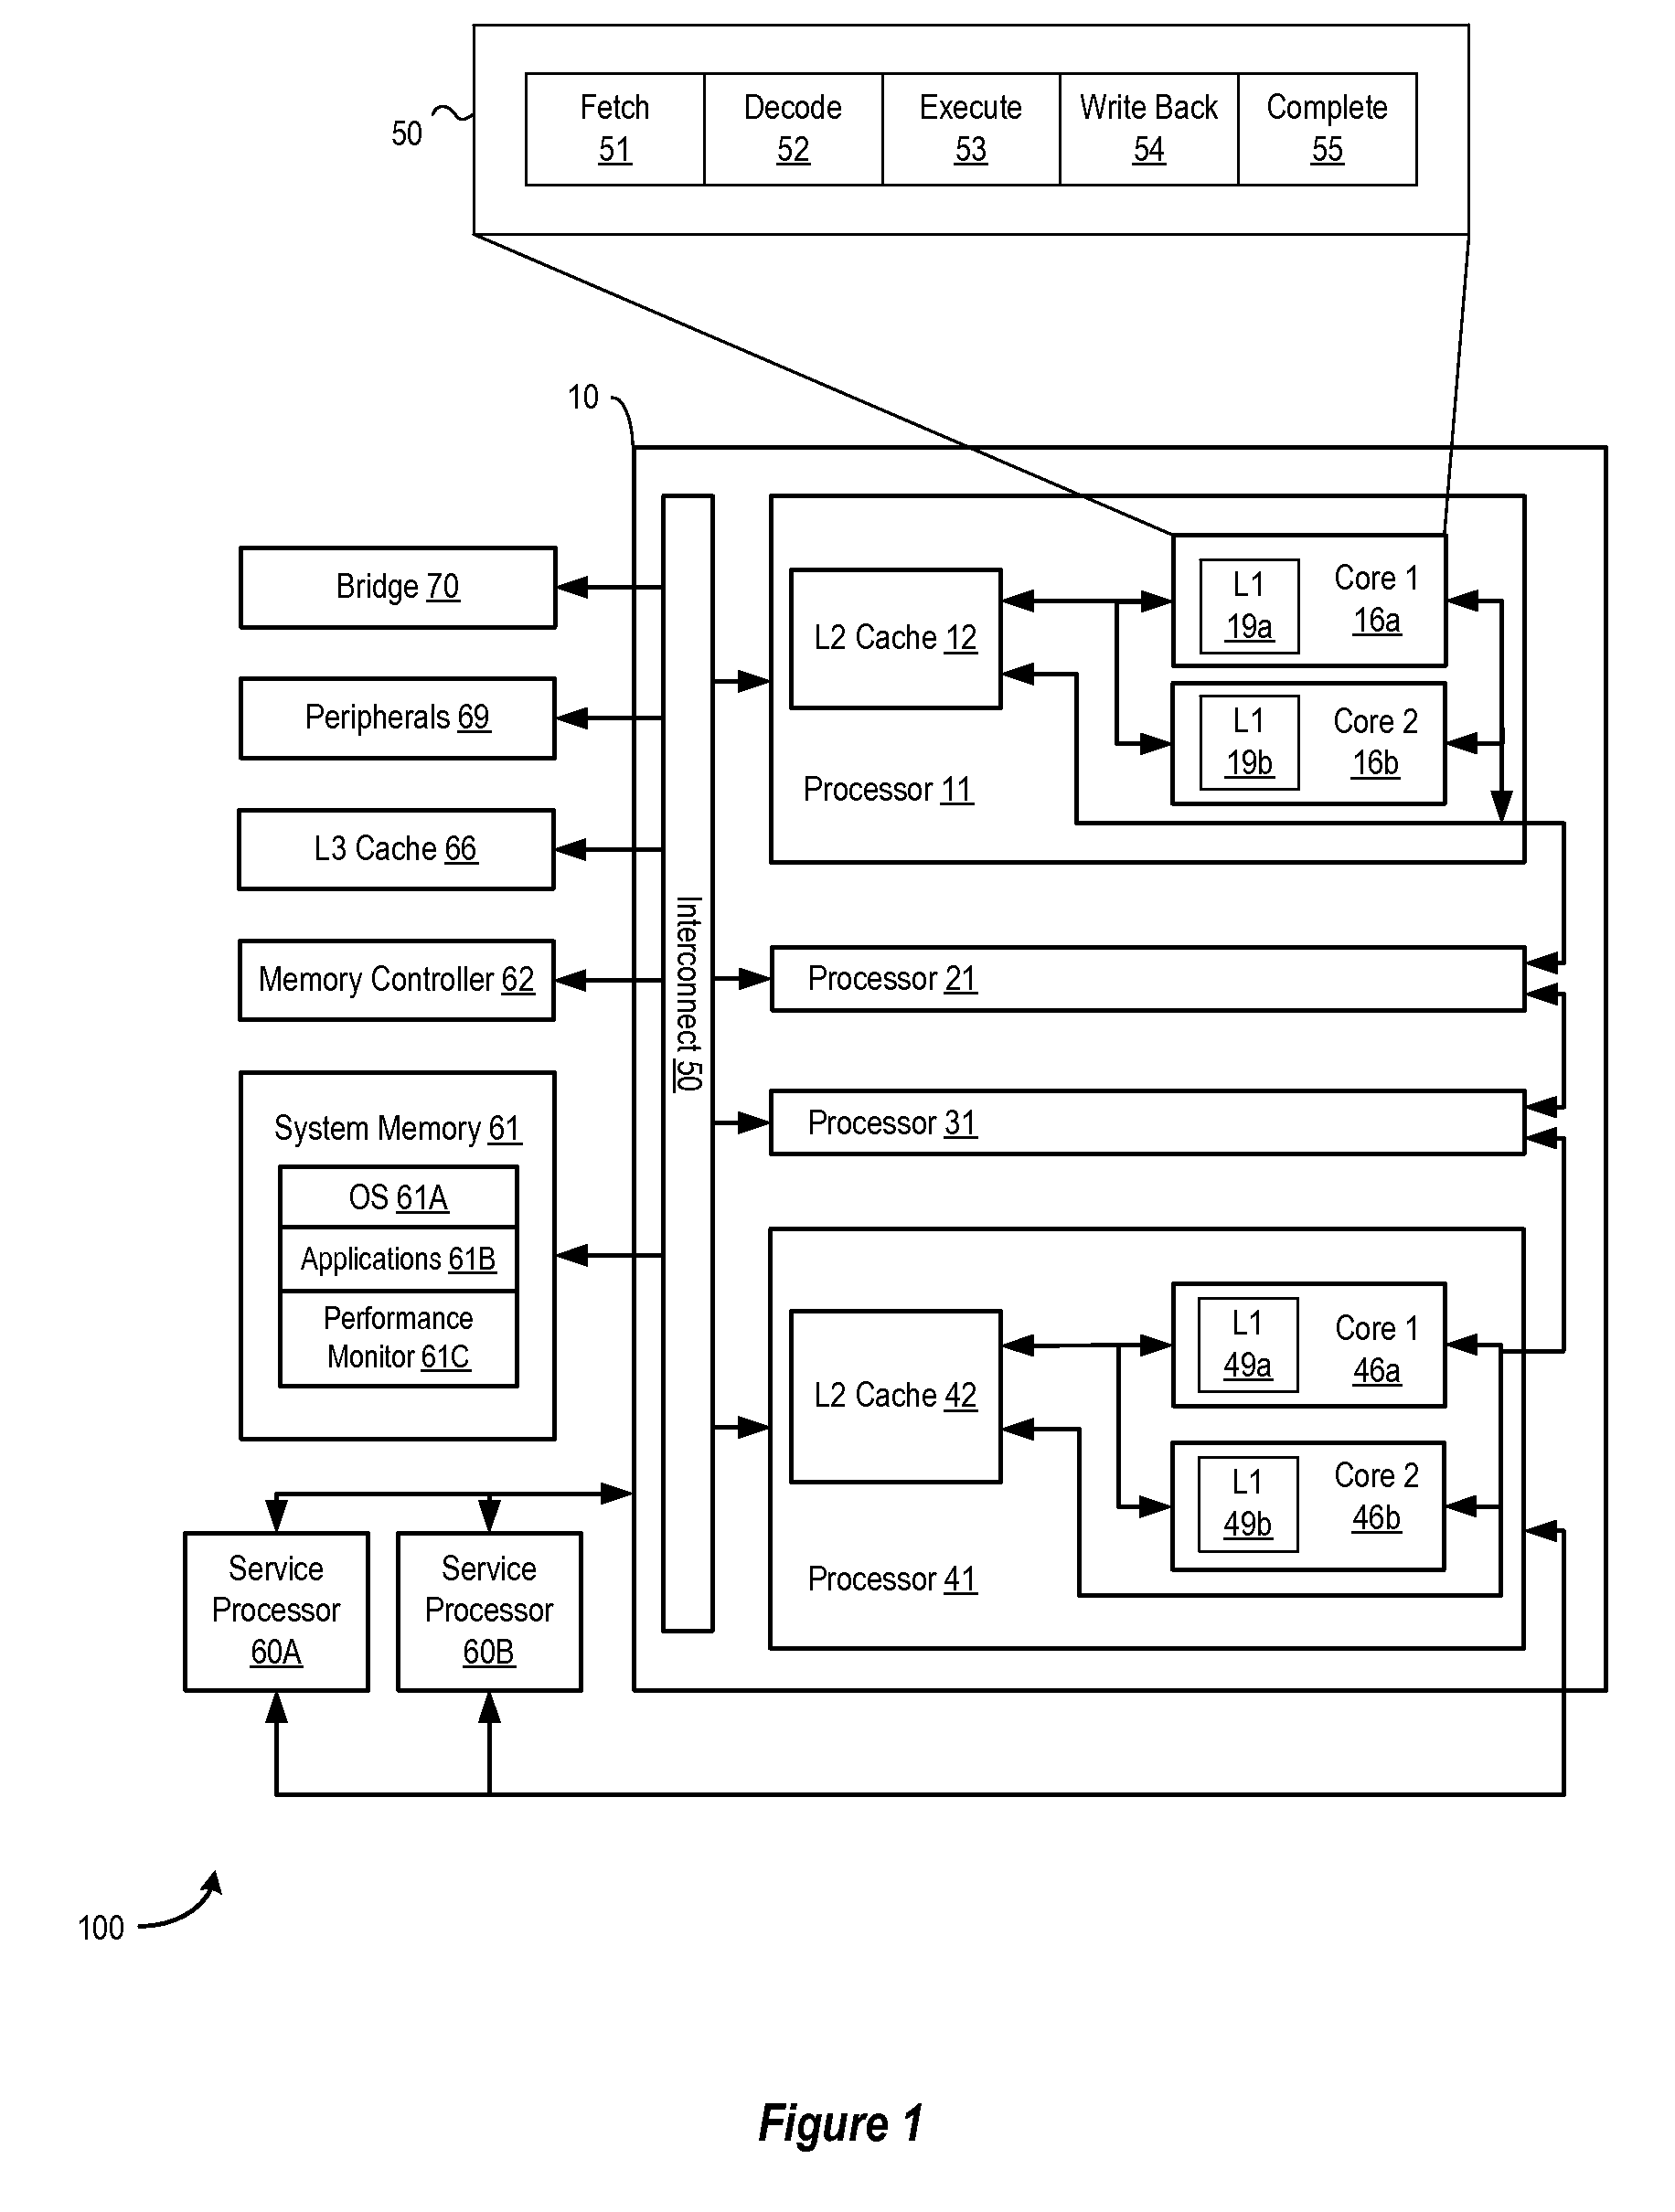 Dynamic processor reconfiguration for low power without reducing performance based on workload execution characteristics